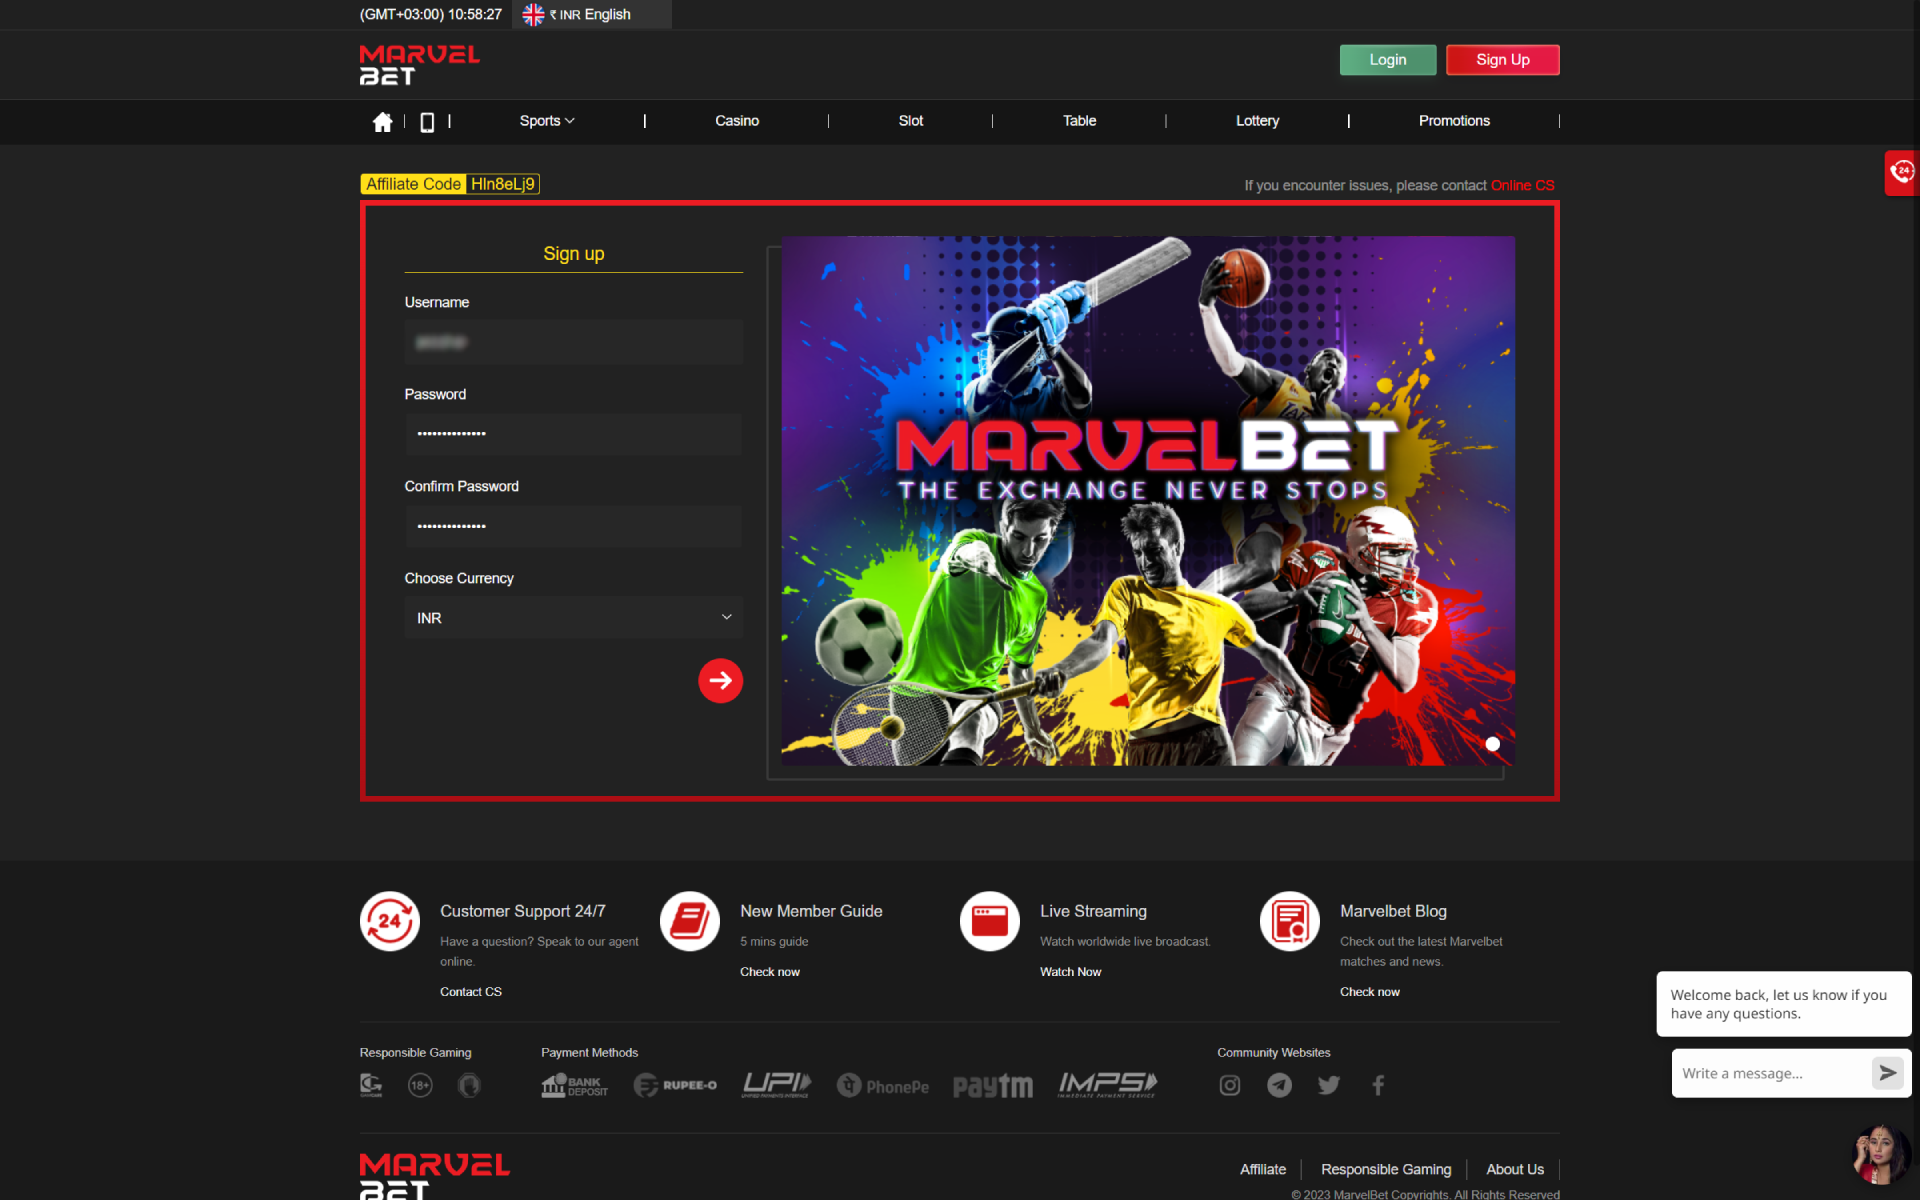 Fill in the fields with your data for registration on Marvelbet.